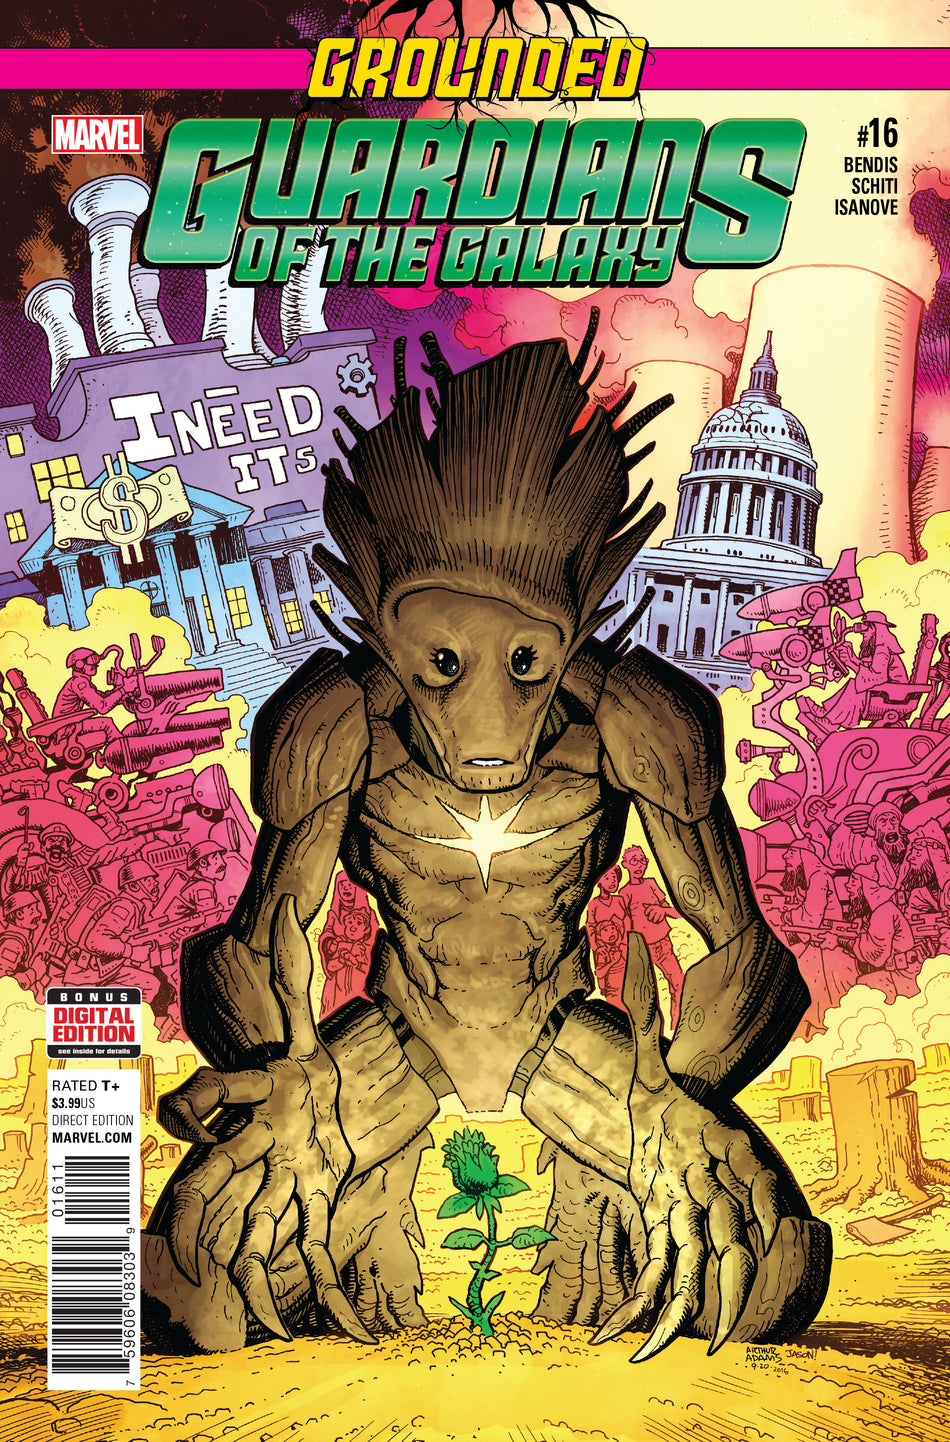 Photo of Guardians of Galaxy Issue 16 comic sold by Stronghold Collectibles